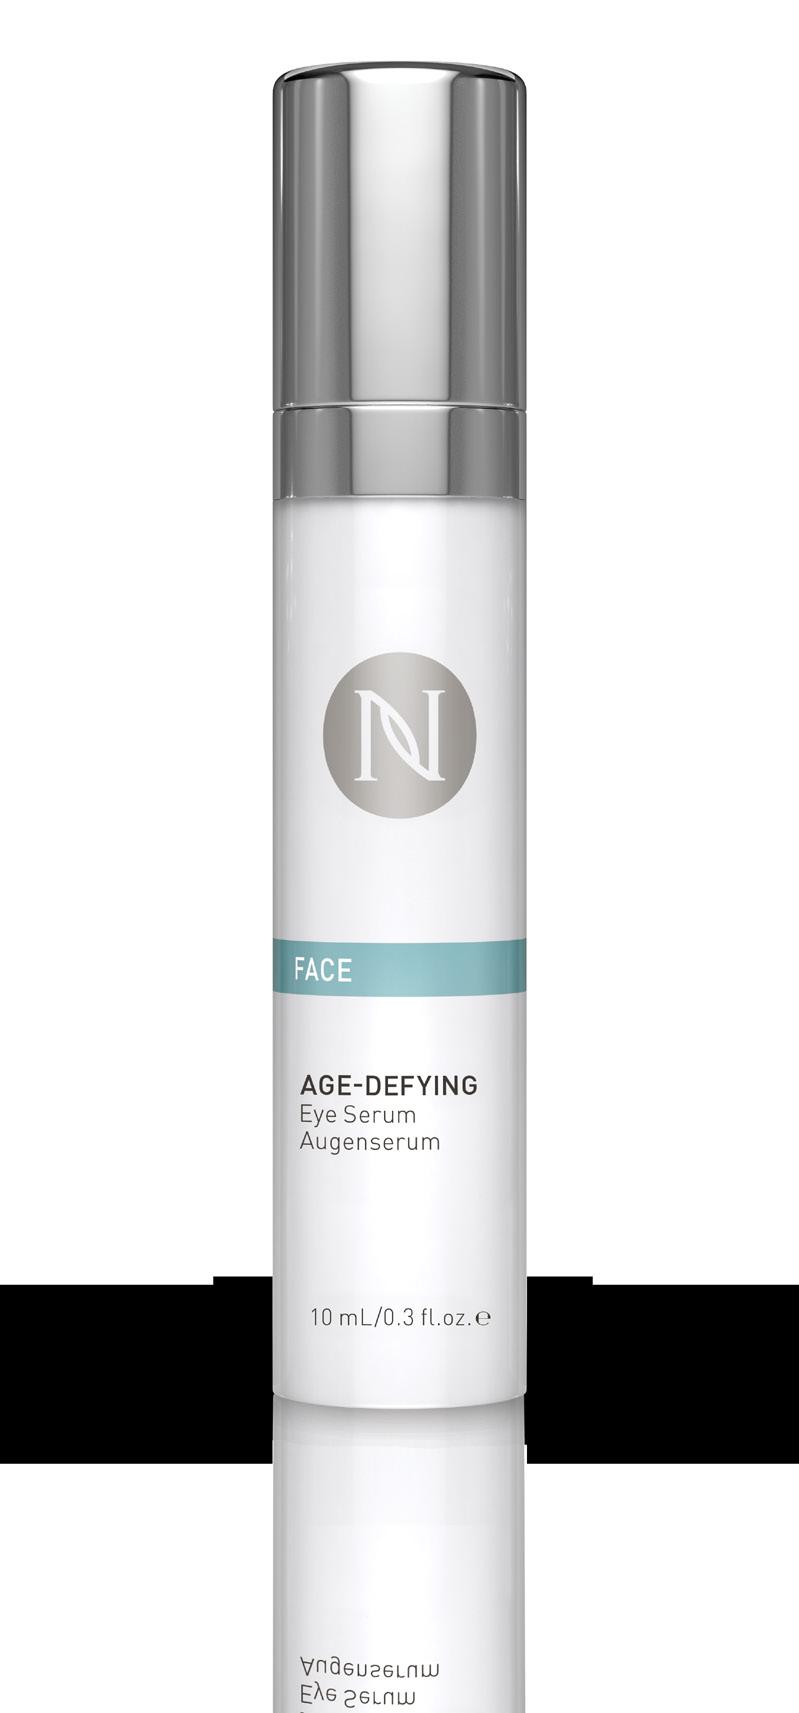 Age-Defying Eye Serum THE SECRET IS IN THE SCIENCE A REVOLUTIONARY PRODUCT Powered by the proprietary SIG-1191 molecule and I-FIL4R ingredient, derived from white lily and Brazilian ginseng, Nerium s